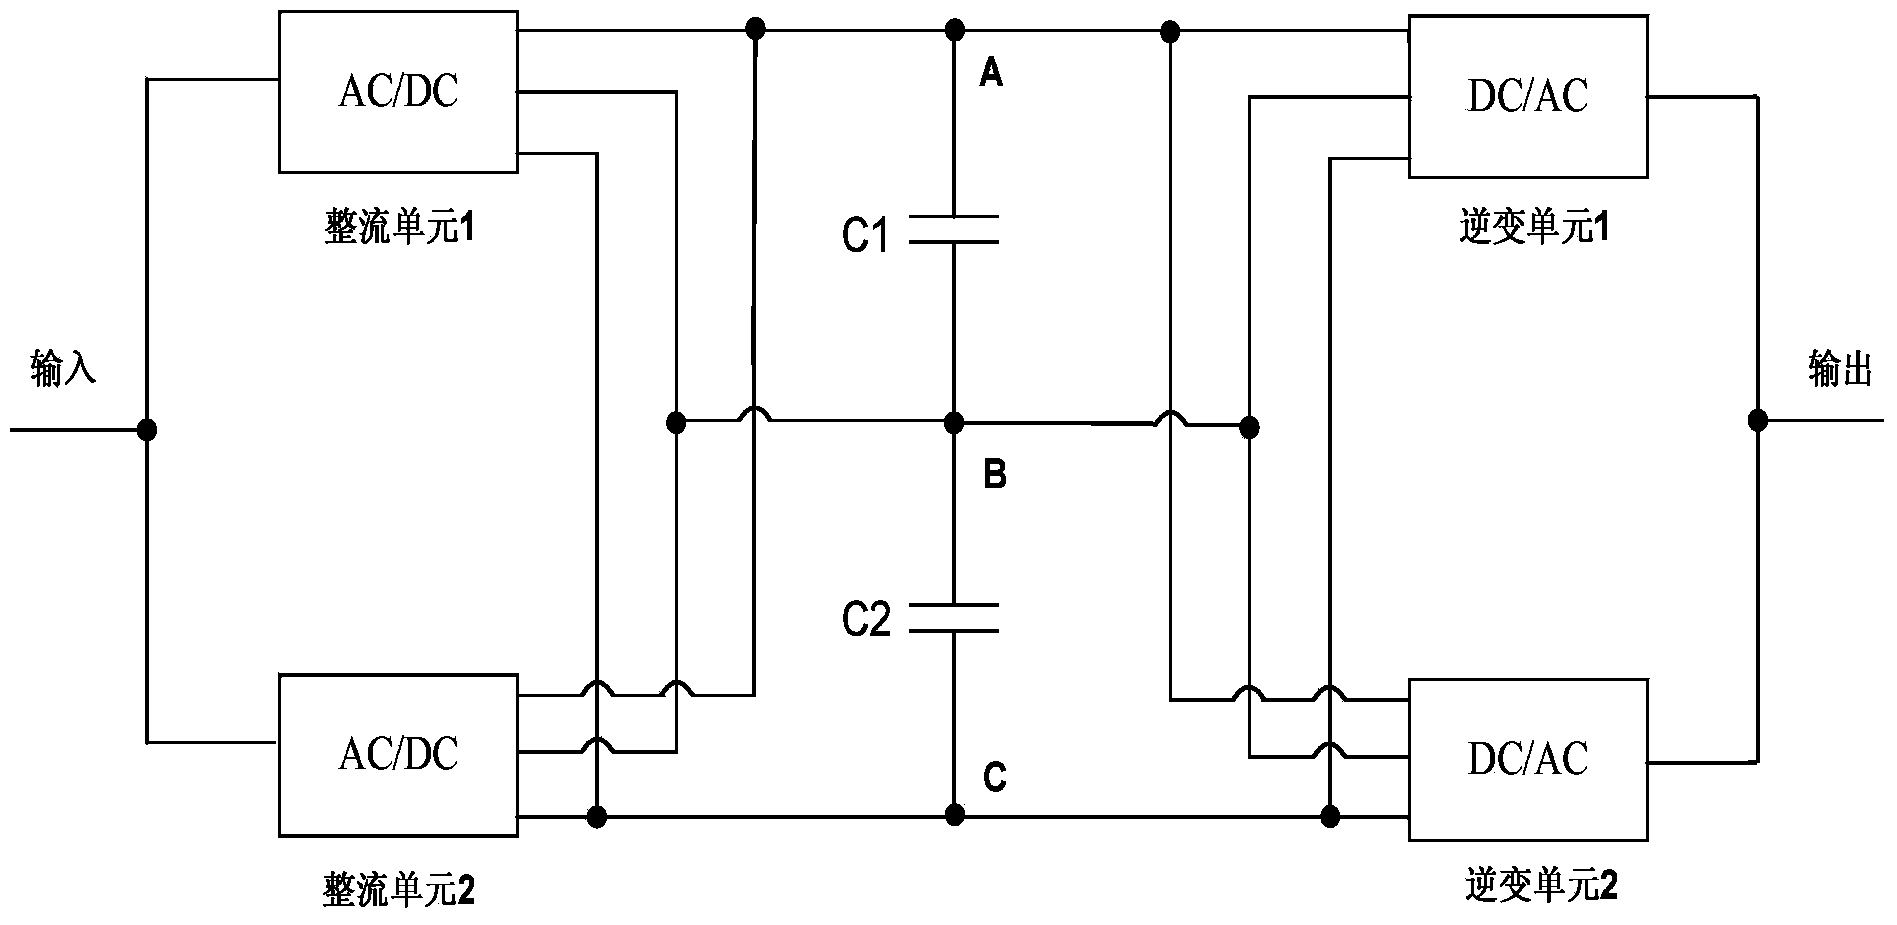 Control method for promoting light load of UPS (Uninterrupted Power Supply)